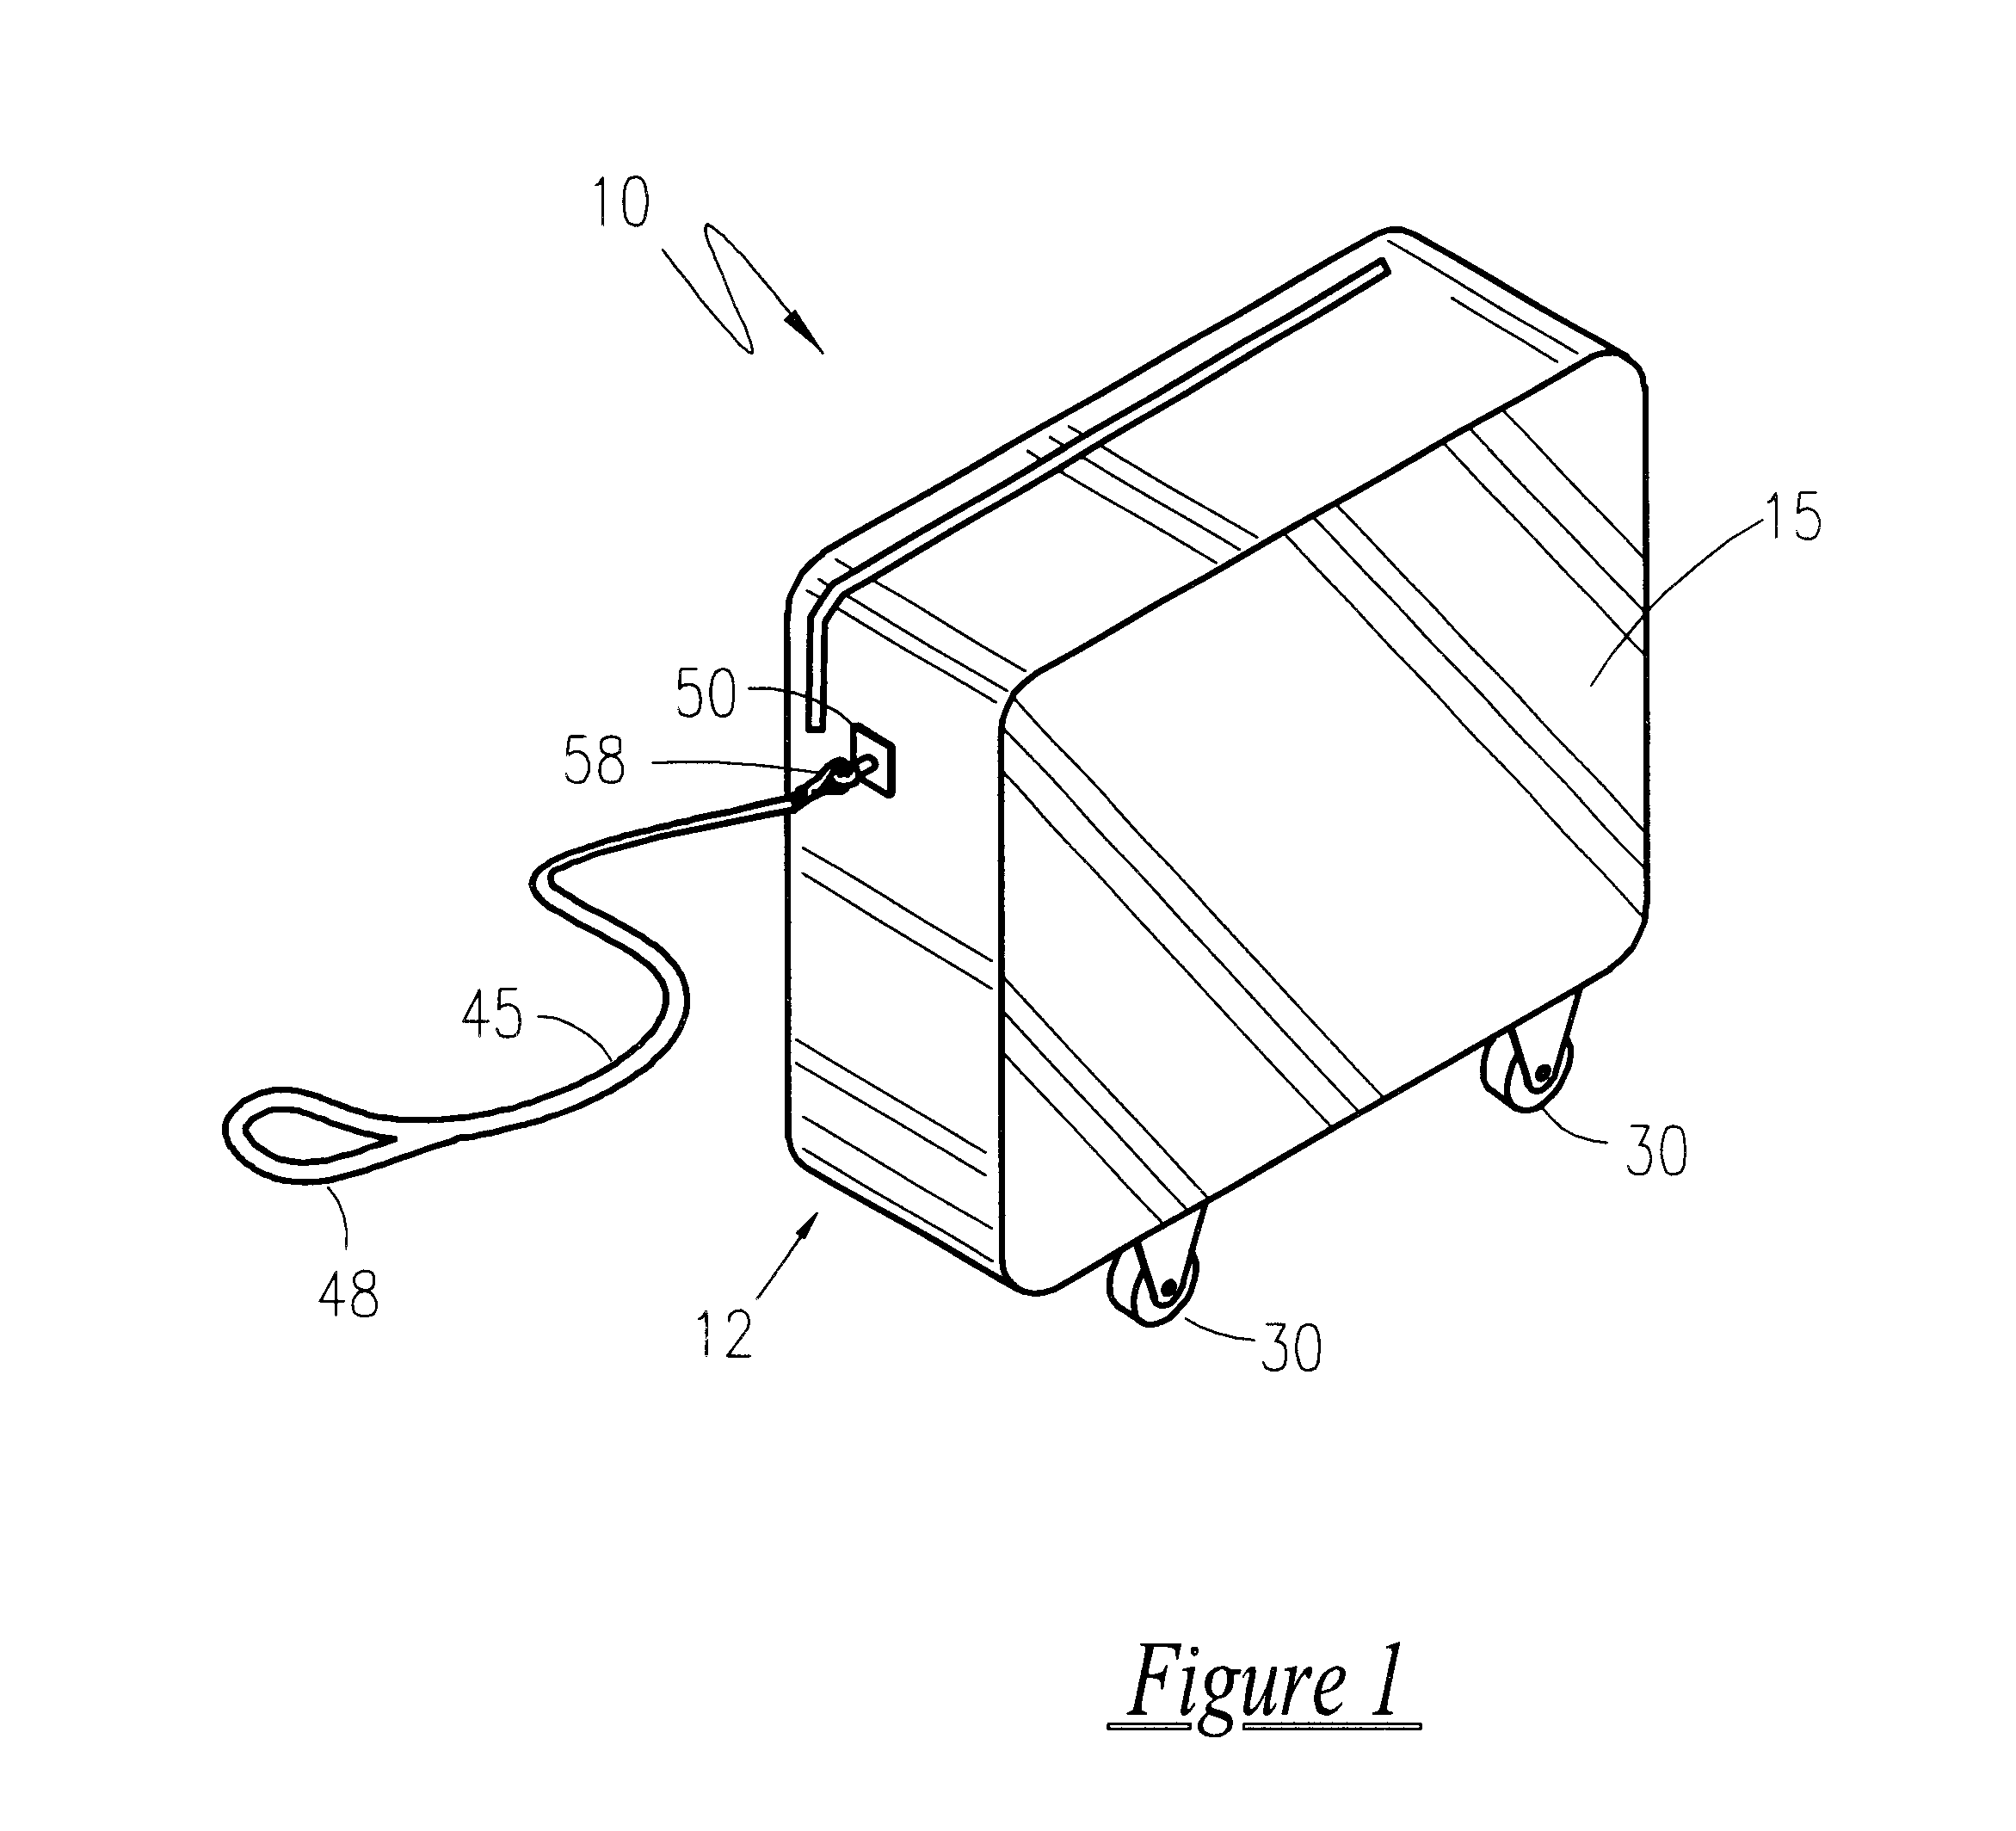 Removably attachable wheel assembly for article transporting containers